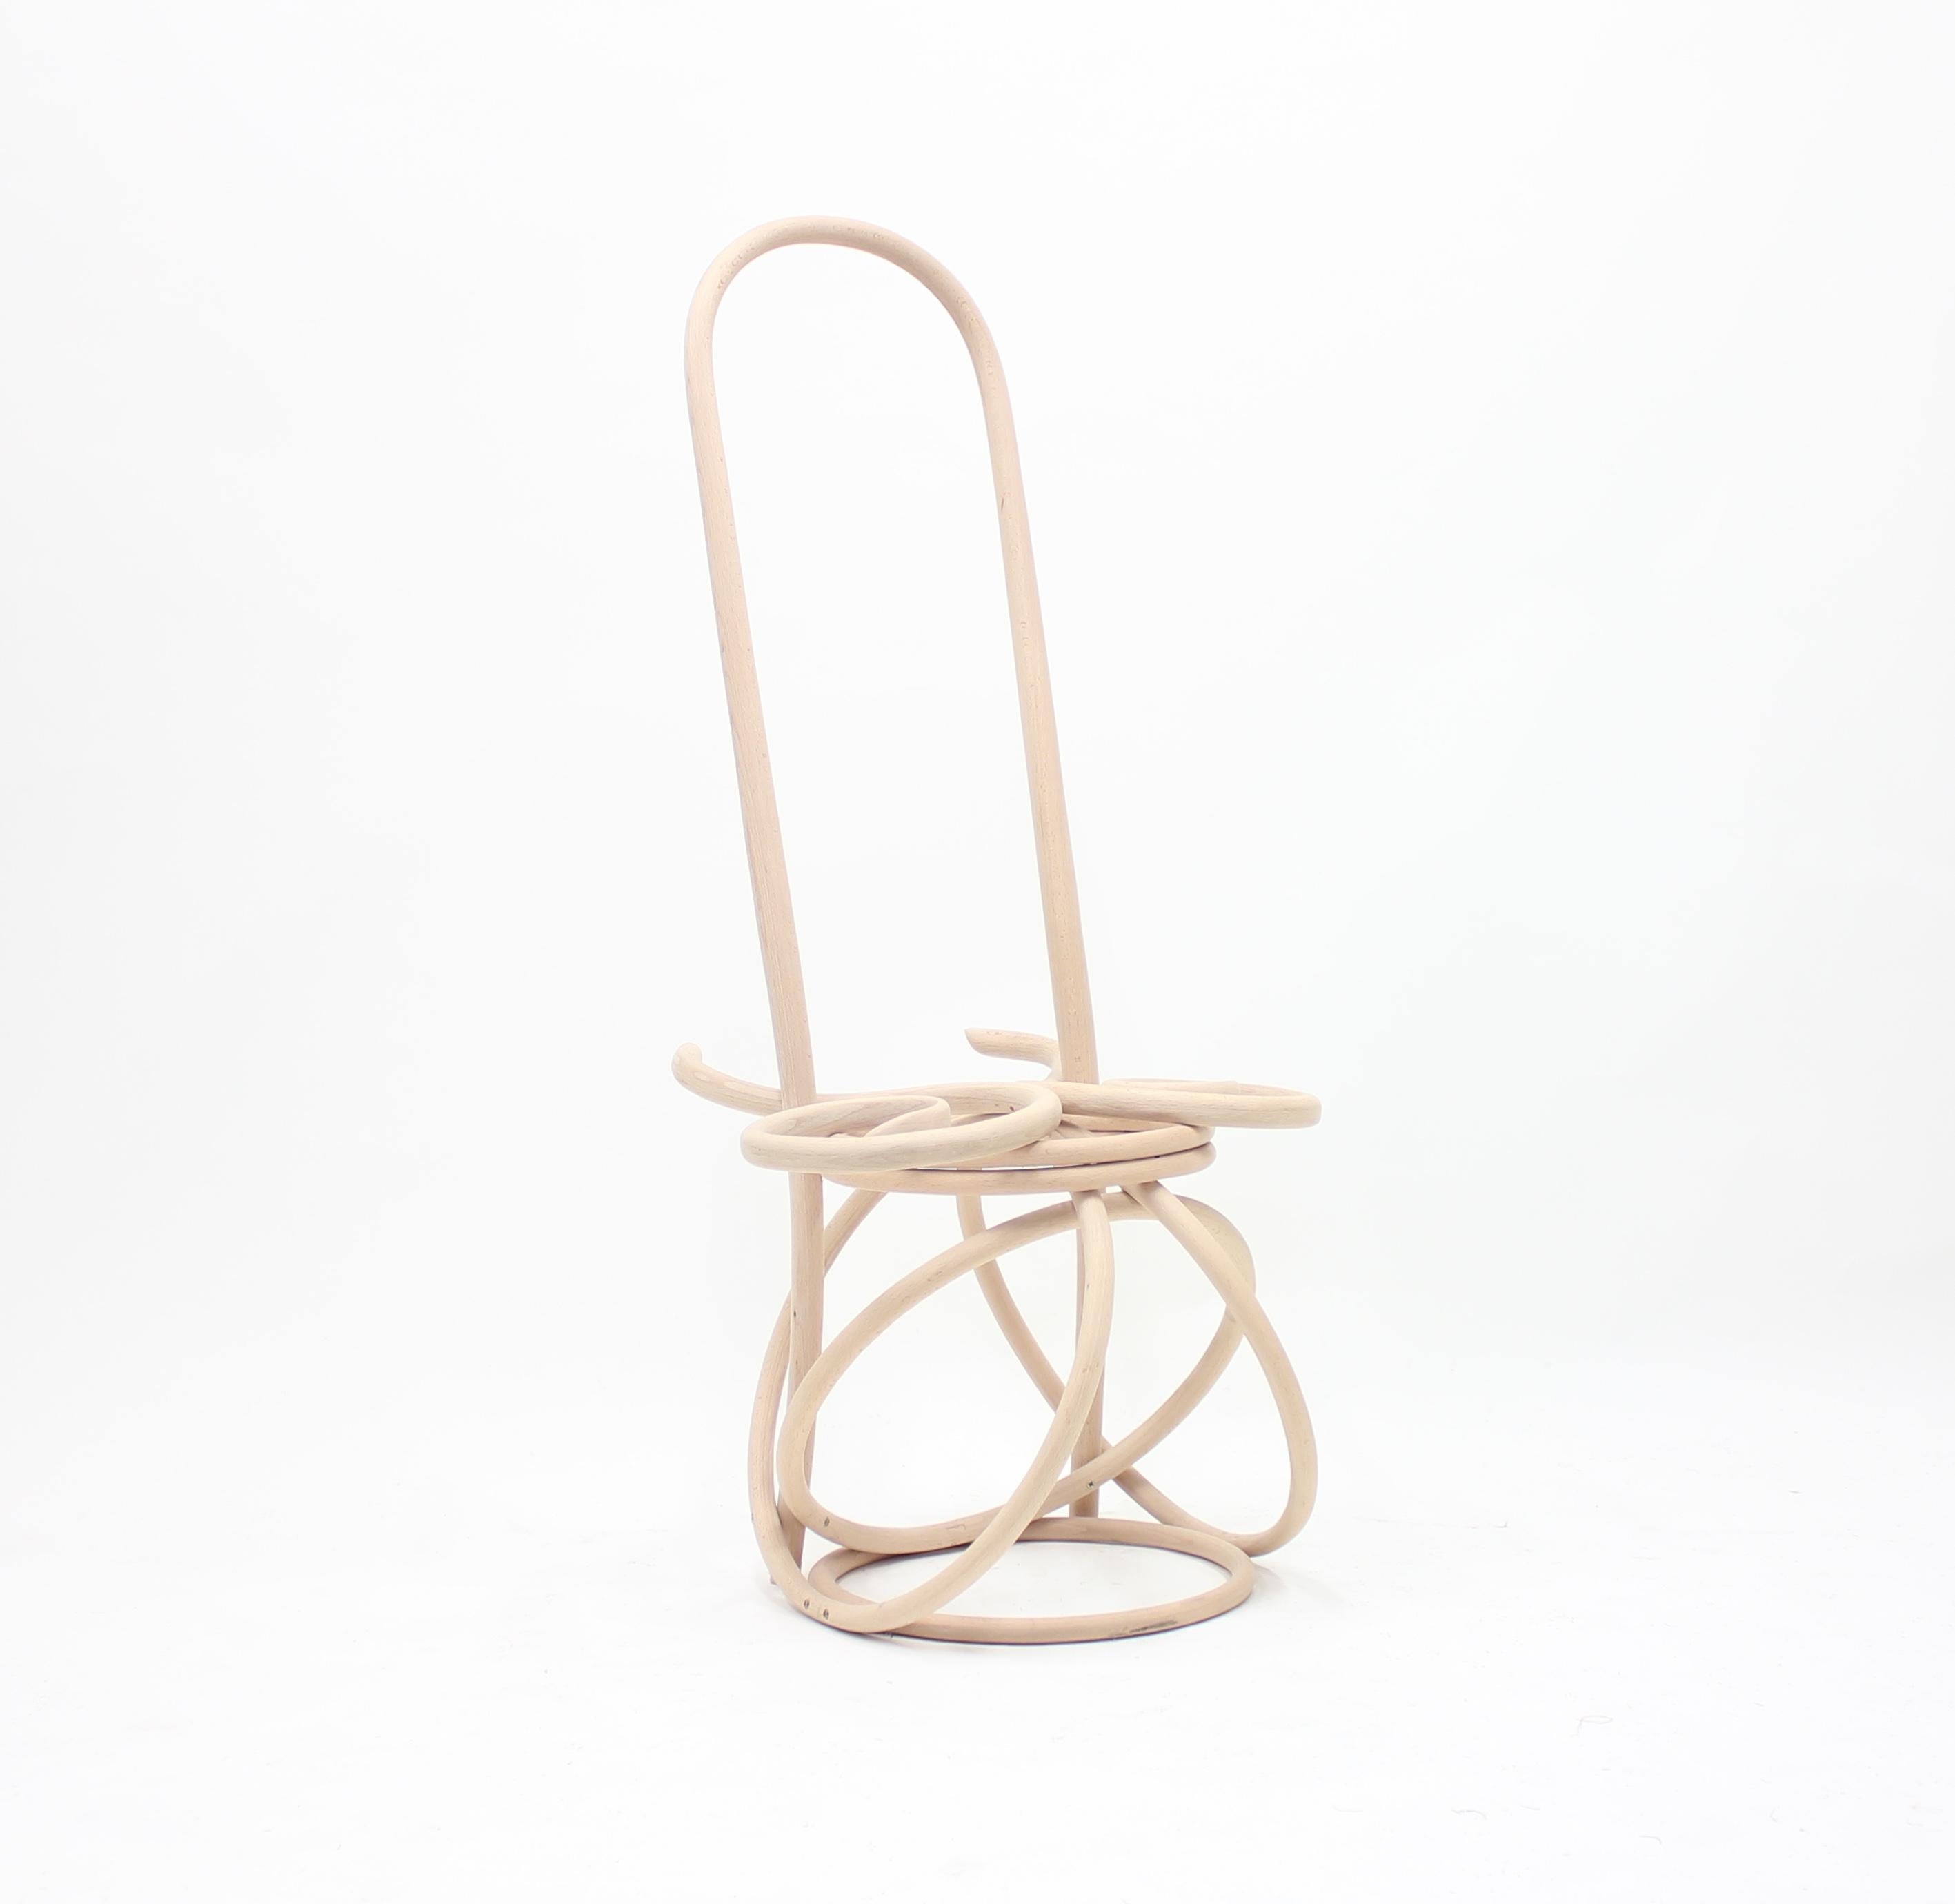 Croatian Chair of the Rings by Martino Gamper for the Conran Shop/Thonet, 2008 For Sale